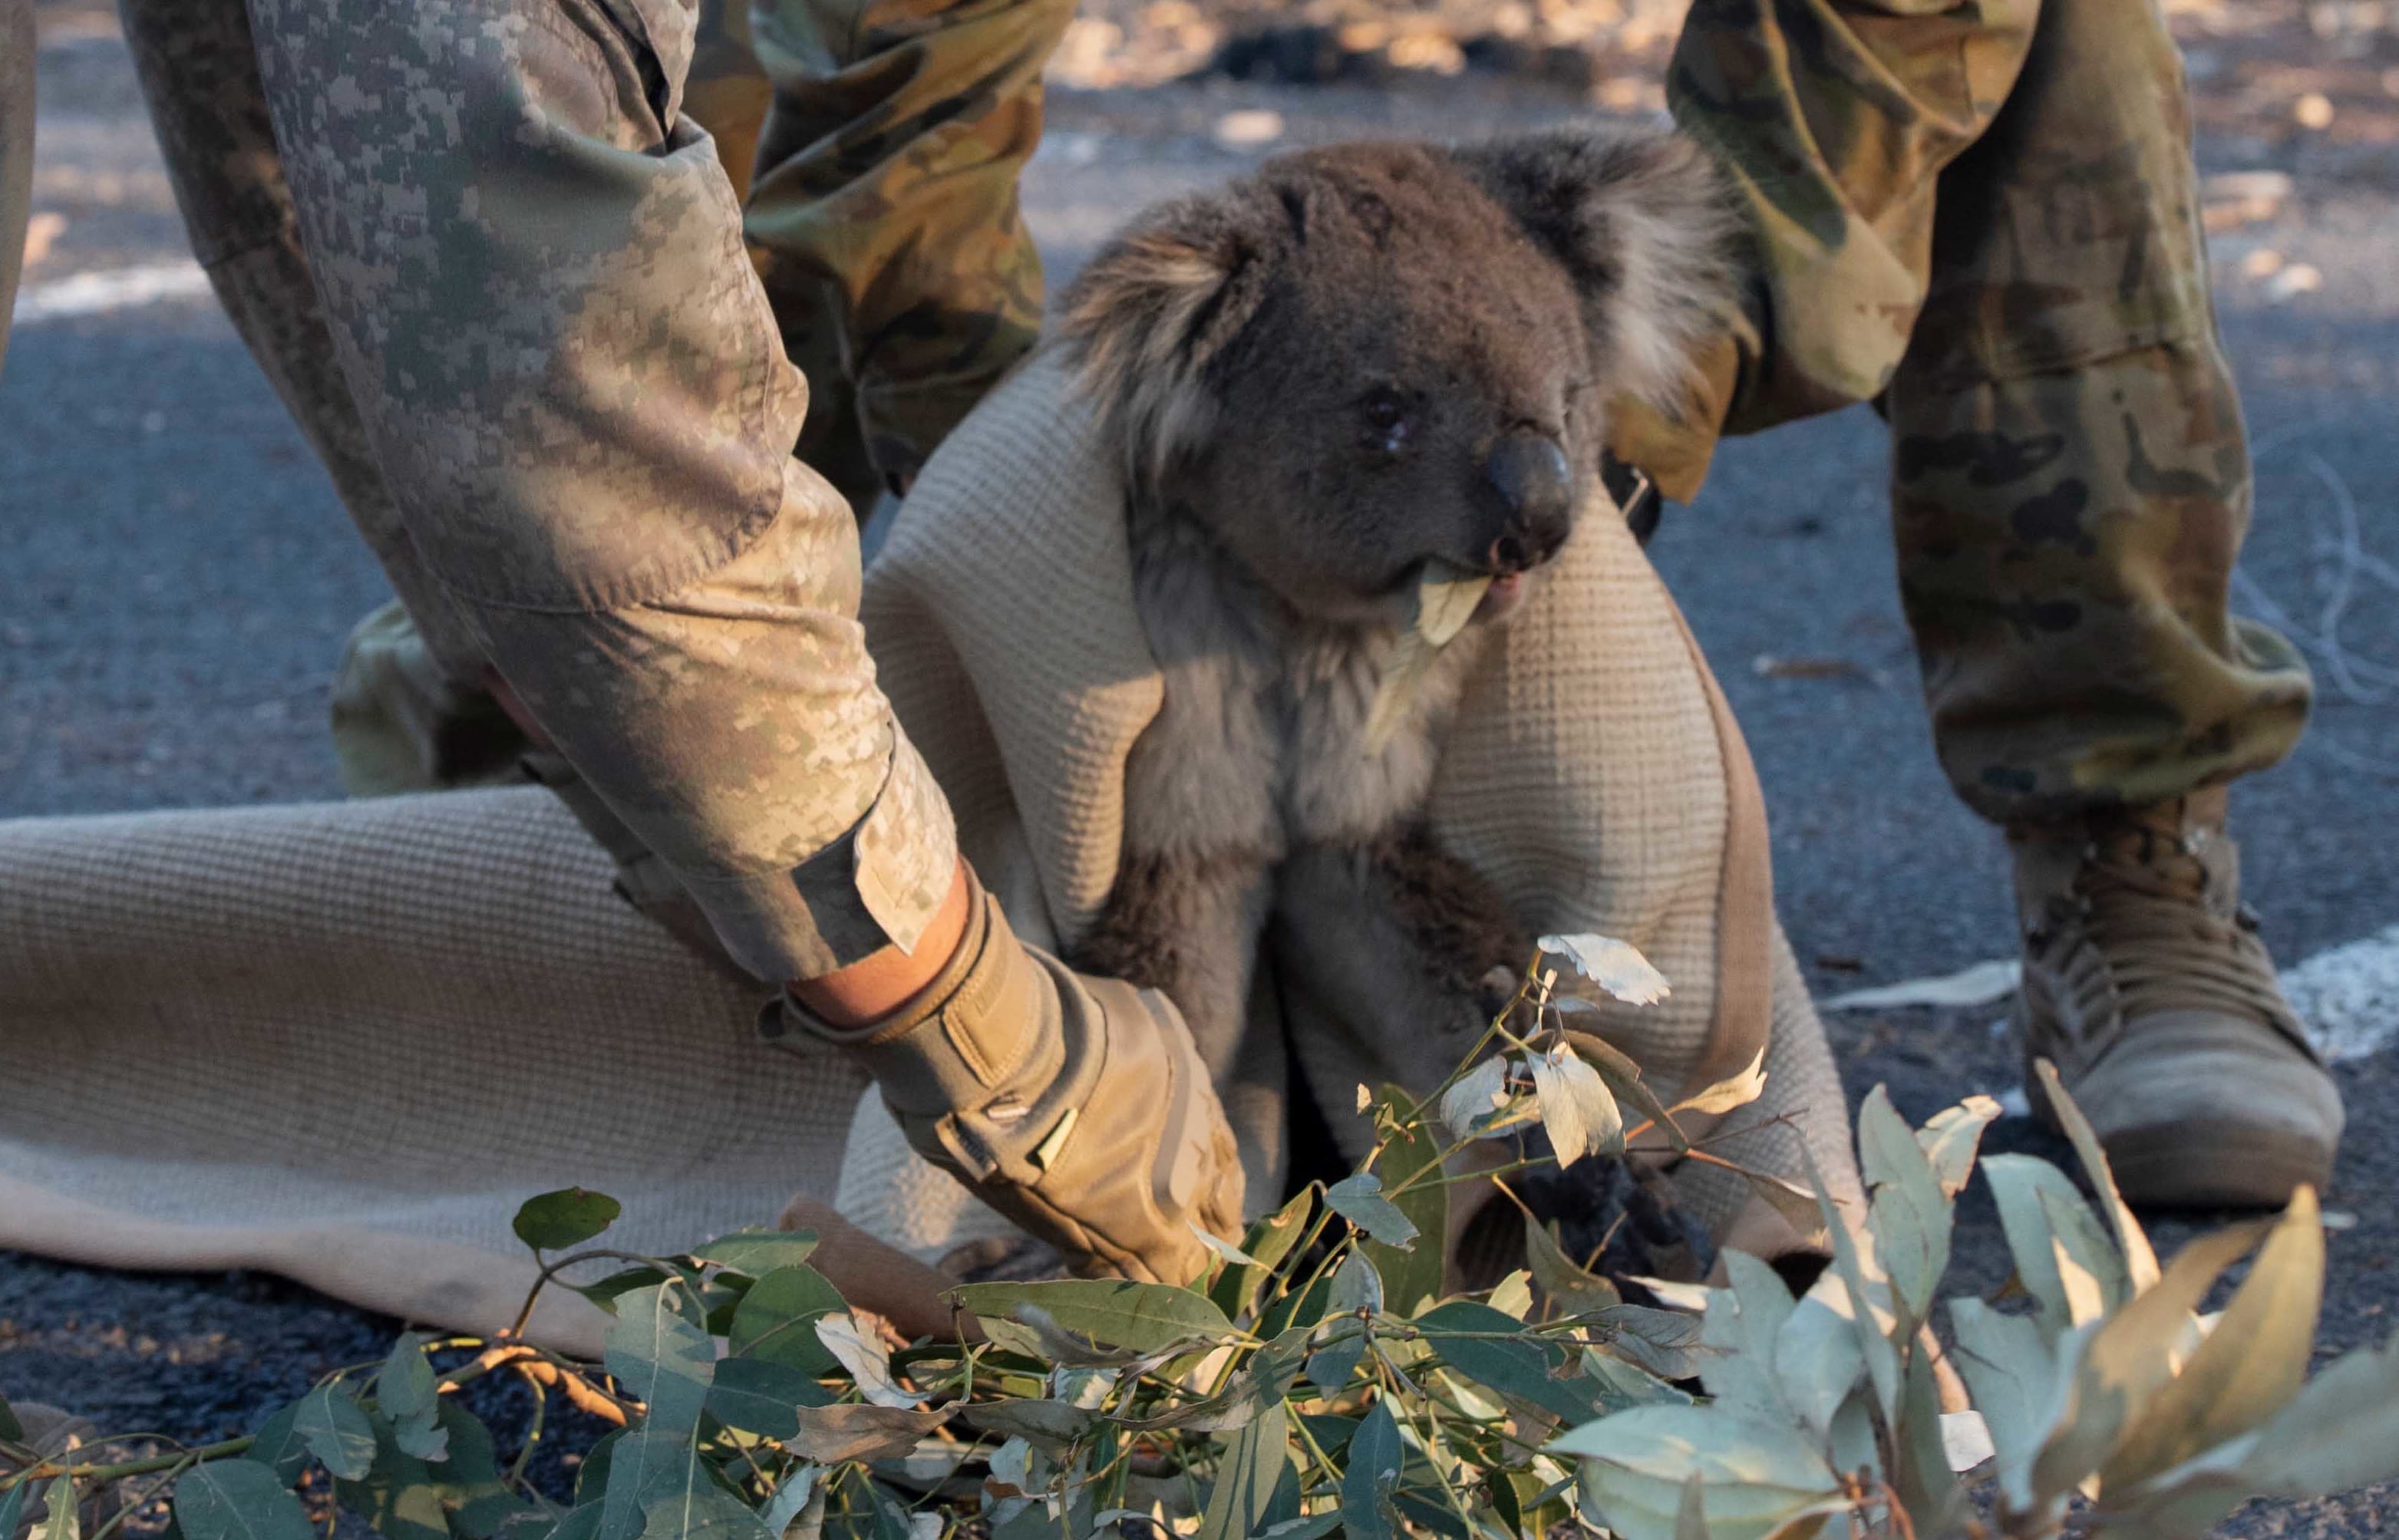 LCPL Schroder and LT Pinheiro help rescue a koala in Findlers Chase National Park.NZ Army and ADF personnel help rescue misplaced Koala at Kangaroo Island during the Australian Bushfires.